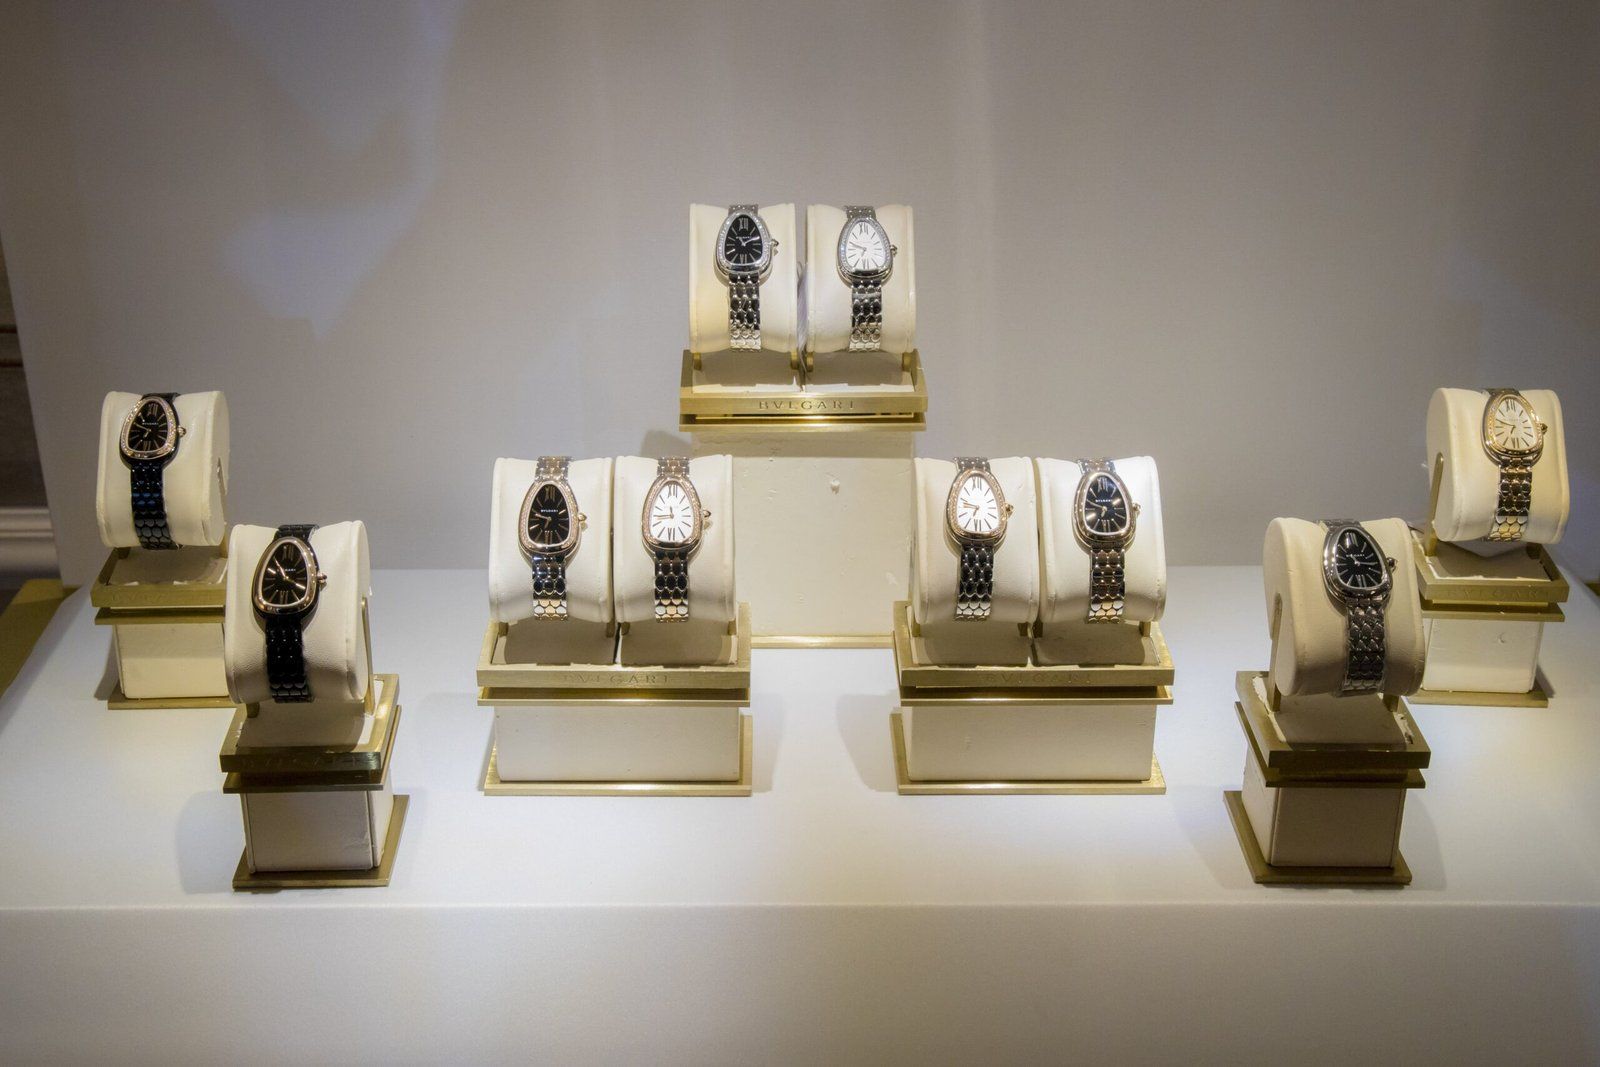 Bulgari Timepieces Take Center Stage at Rose - The Watch Bar's Rendez-Vous